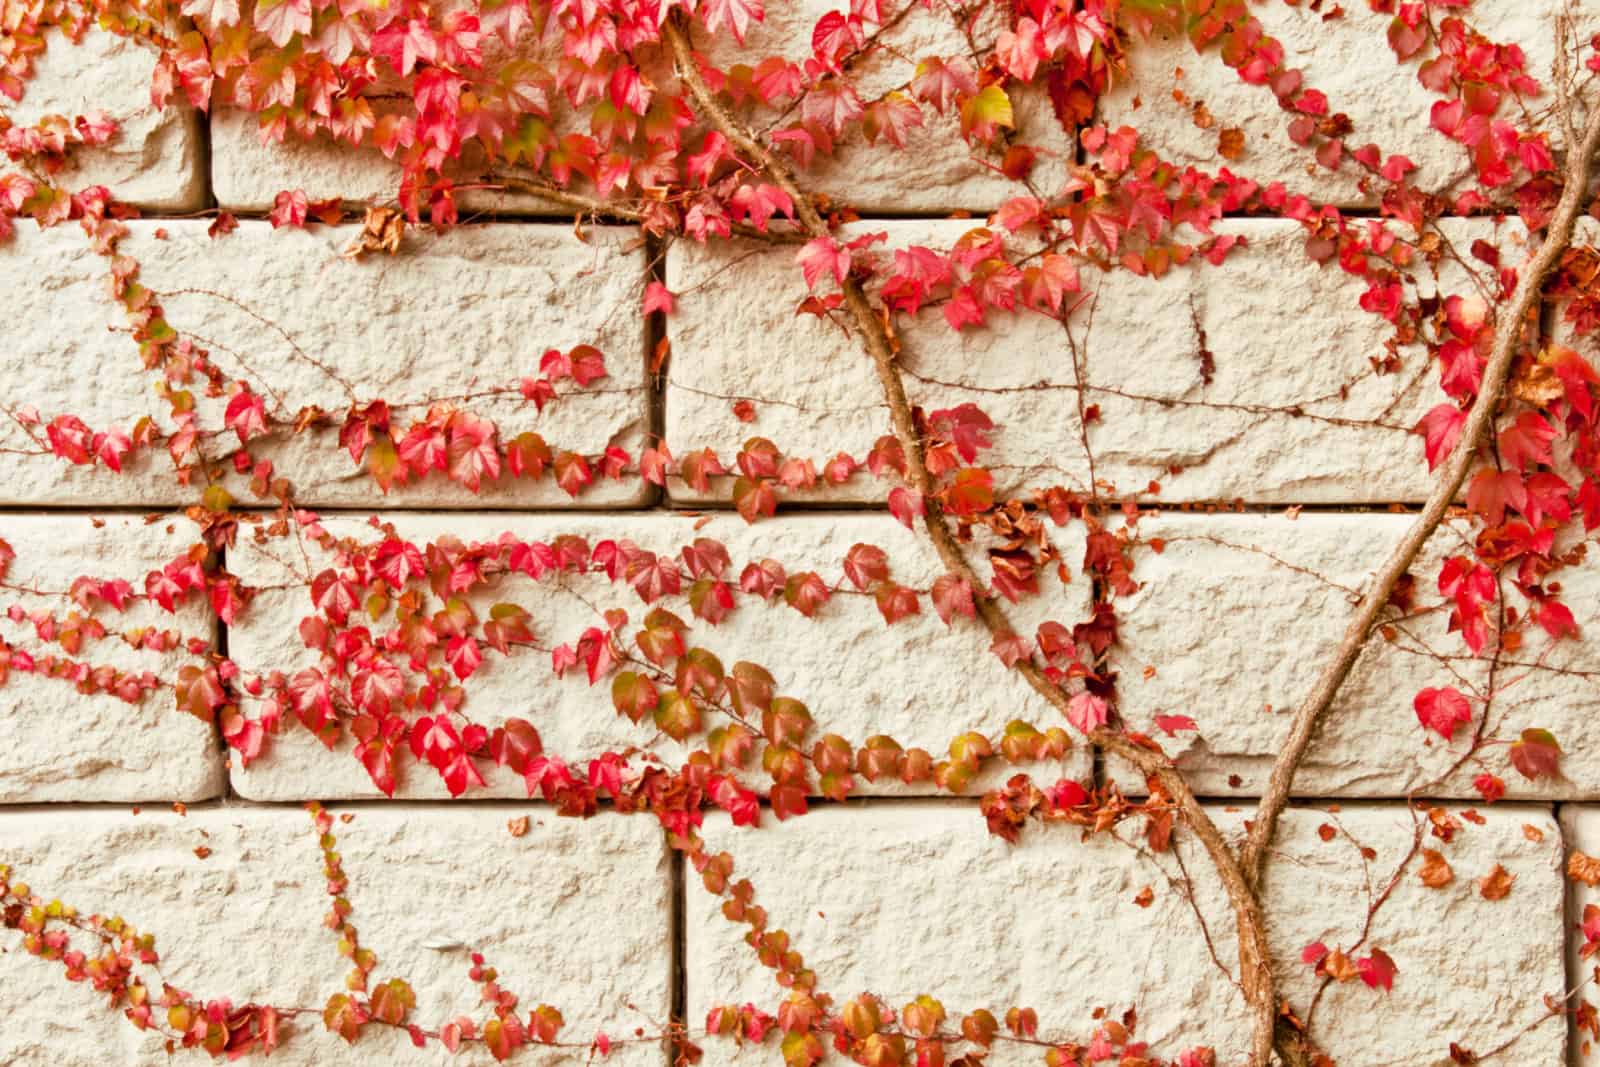 red Virginia creeper climbing up a white wall